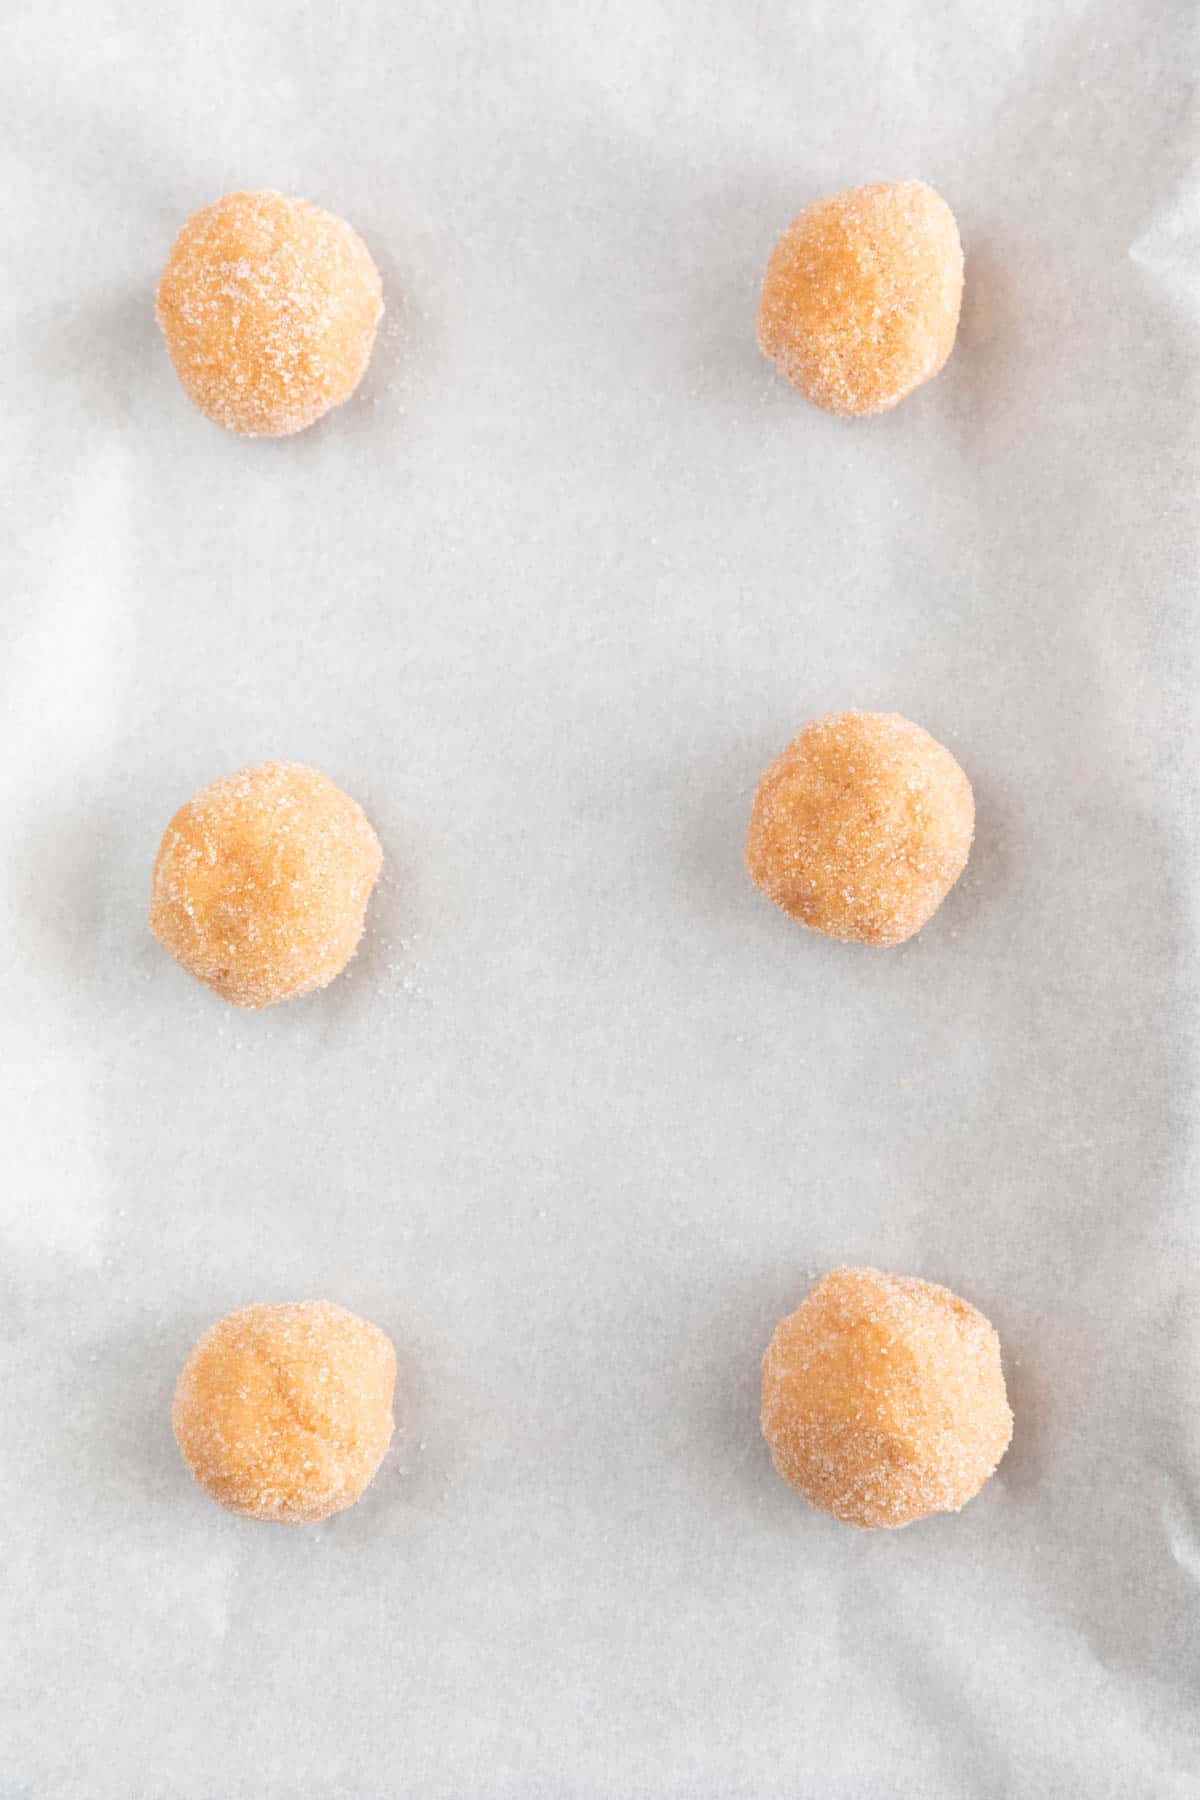 Cookie balls rolled in sugar onto a lined baking sheet.